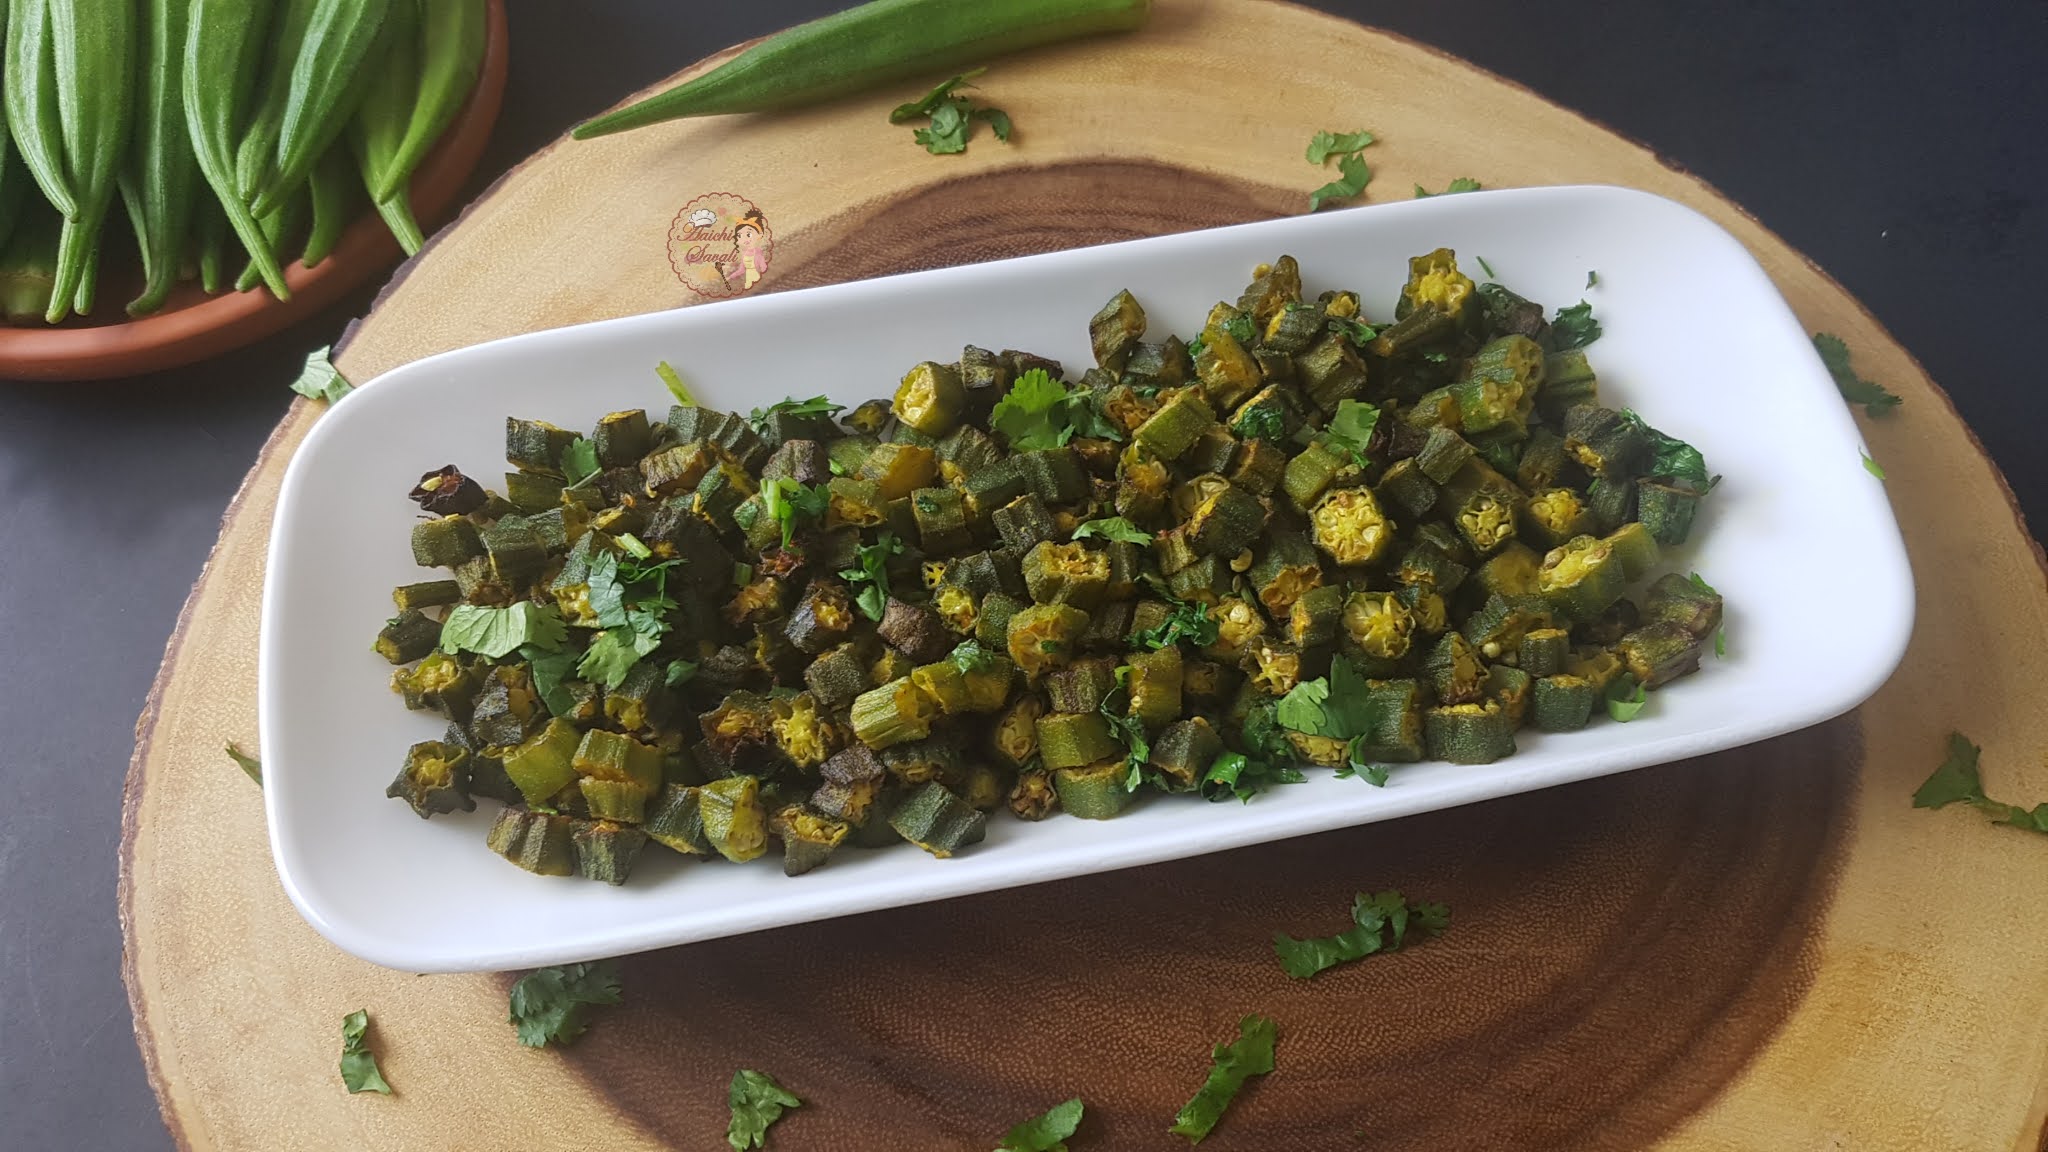 Bhindi Fry Okra Fry In Gowise Airfryer How To Make Non Sticky Bhindi Fry Okra Fry In The Air Fryer Aaichi Savali,Best Washing Machines For The Money